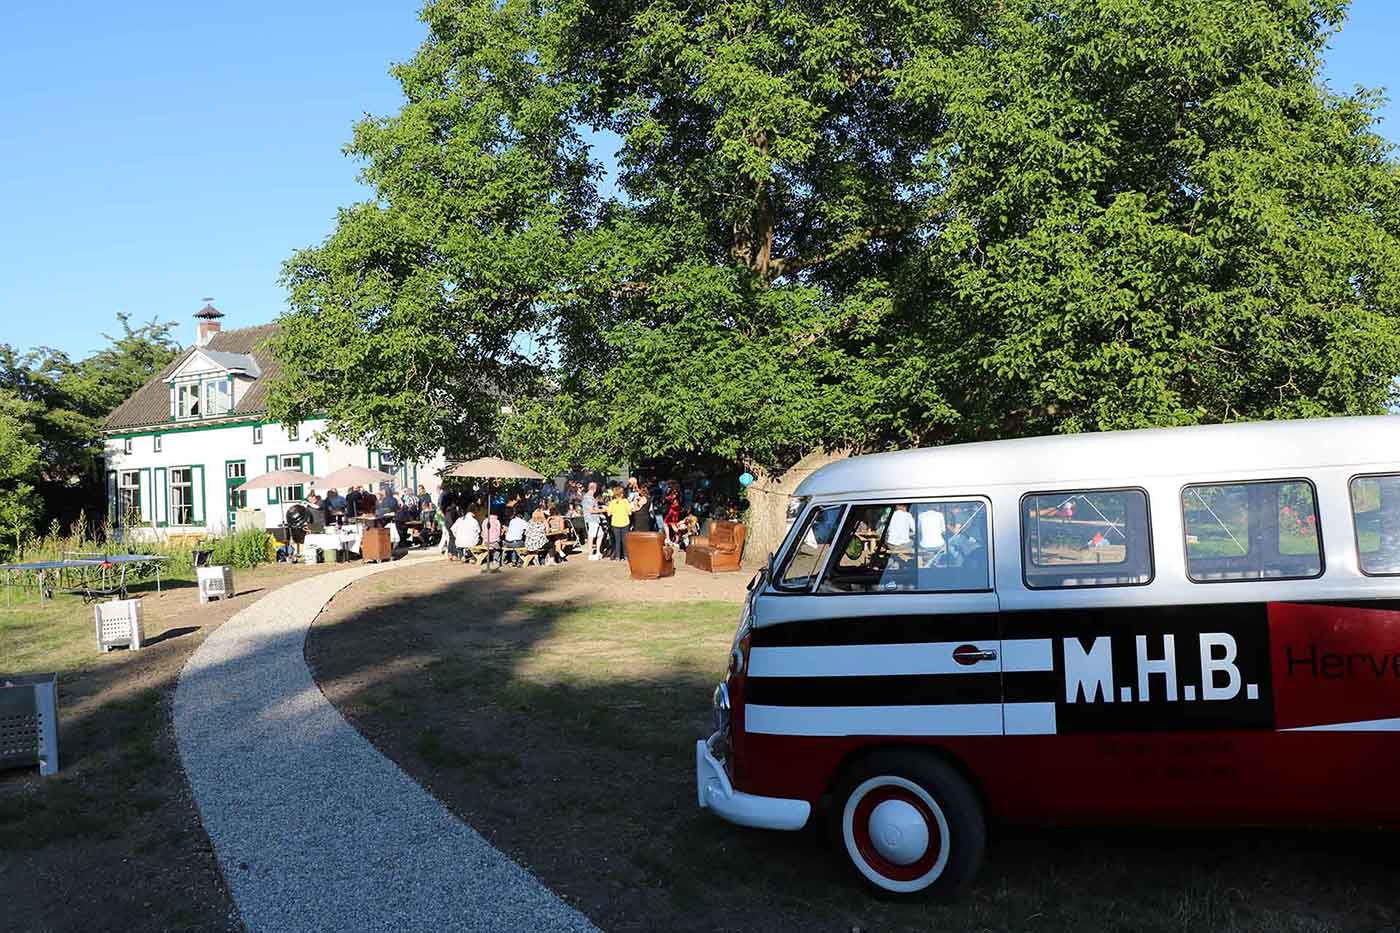 A summer bbq festival for MHB employees with the MHB van